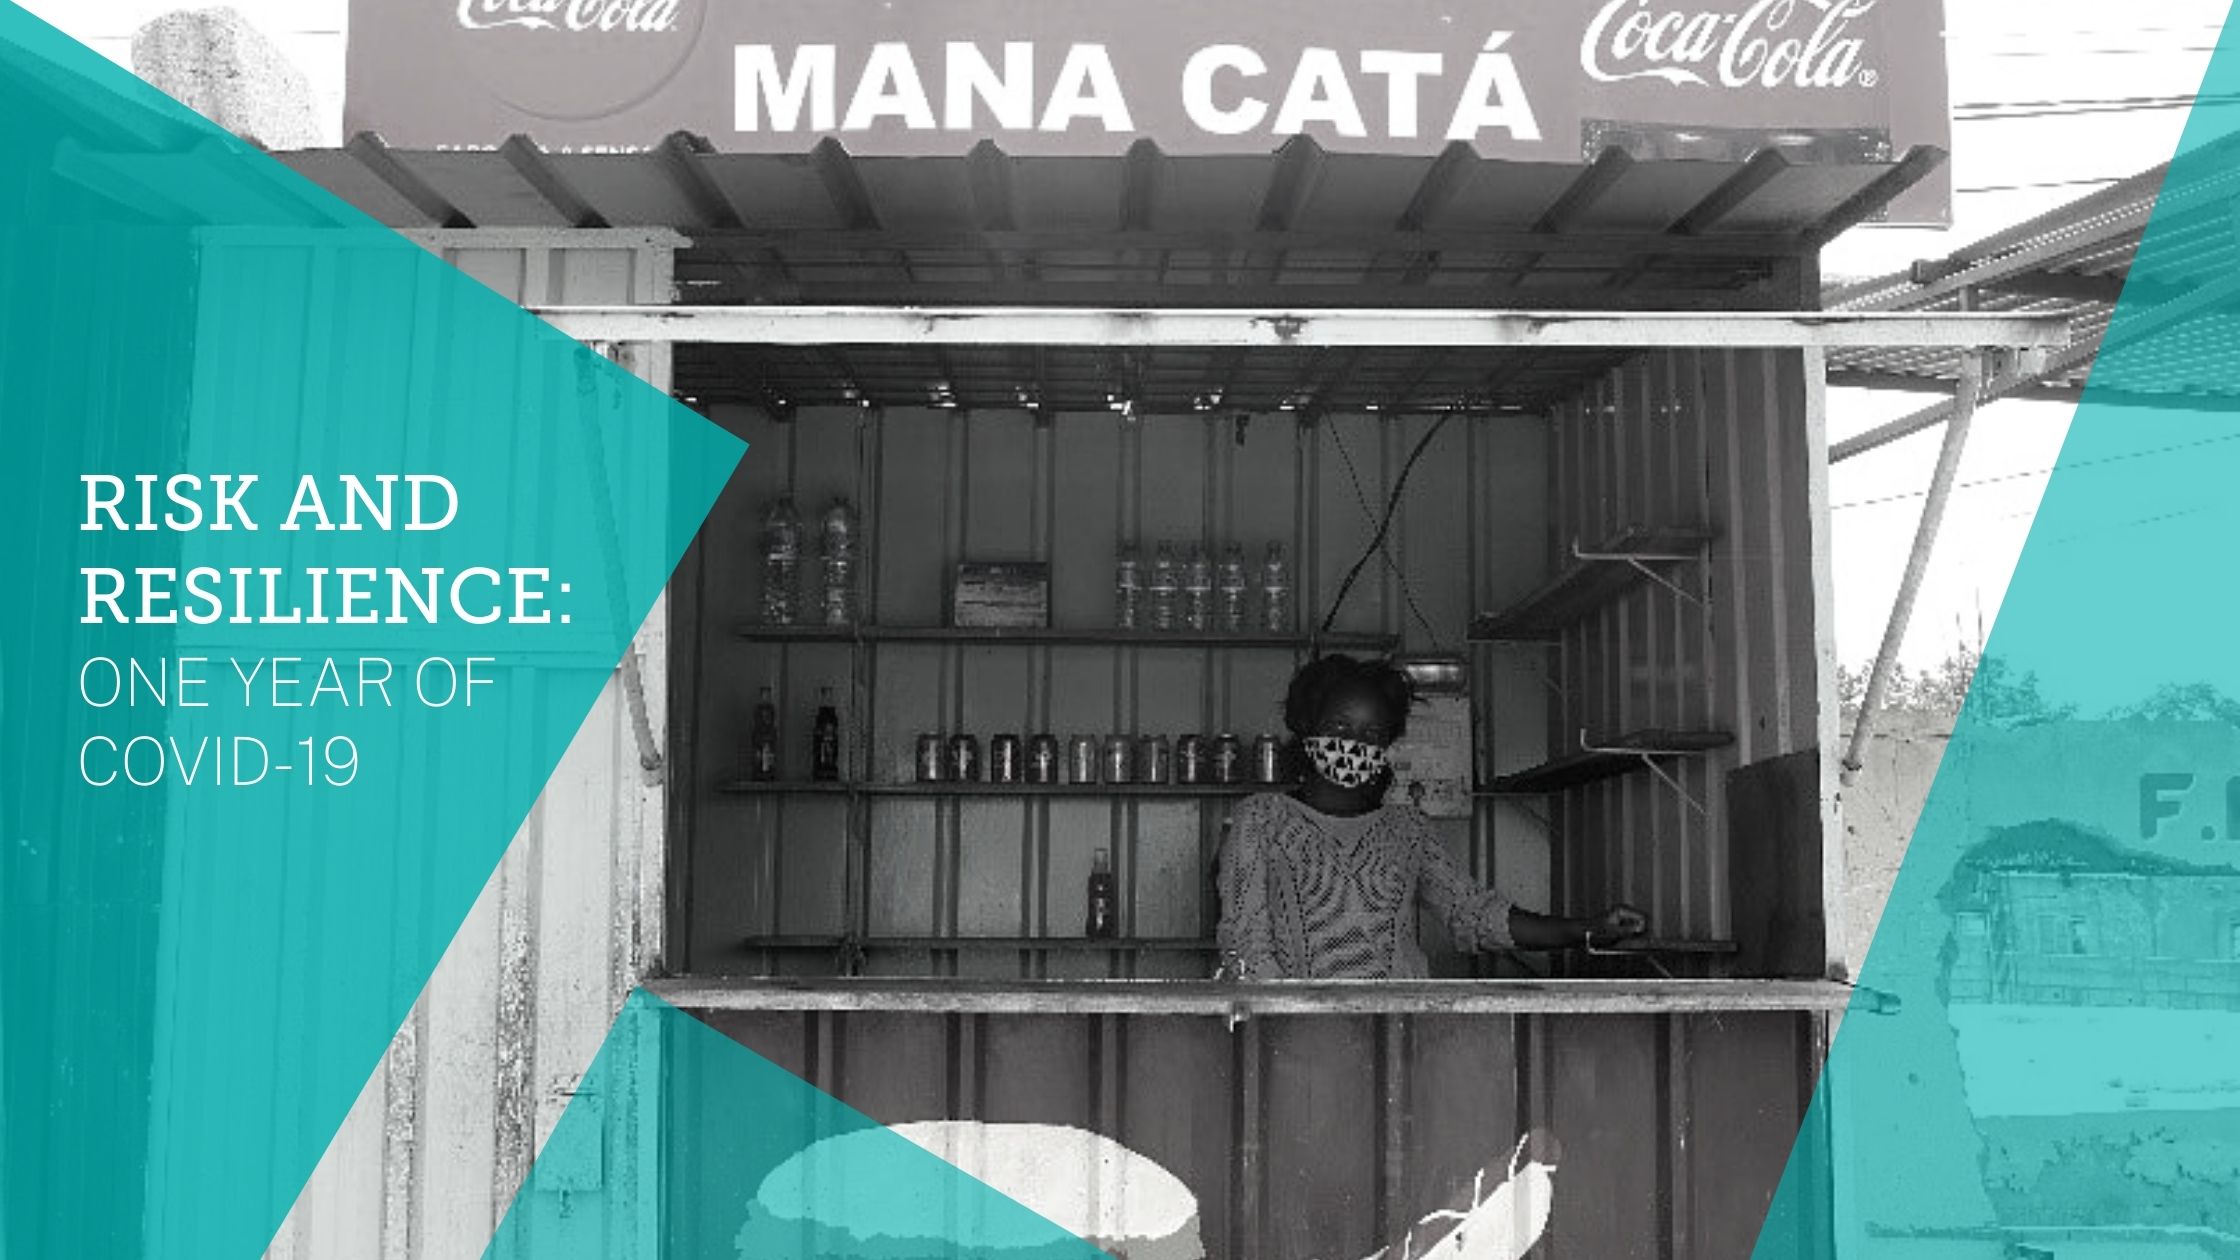 Catarina Bié is a small business owner in Maputo, Mozambique. 